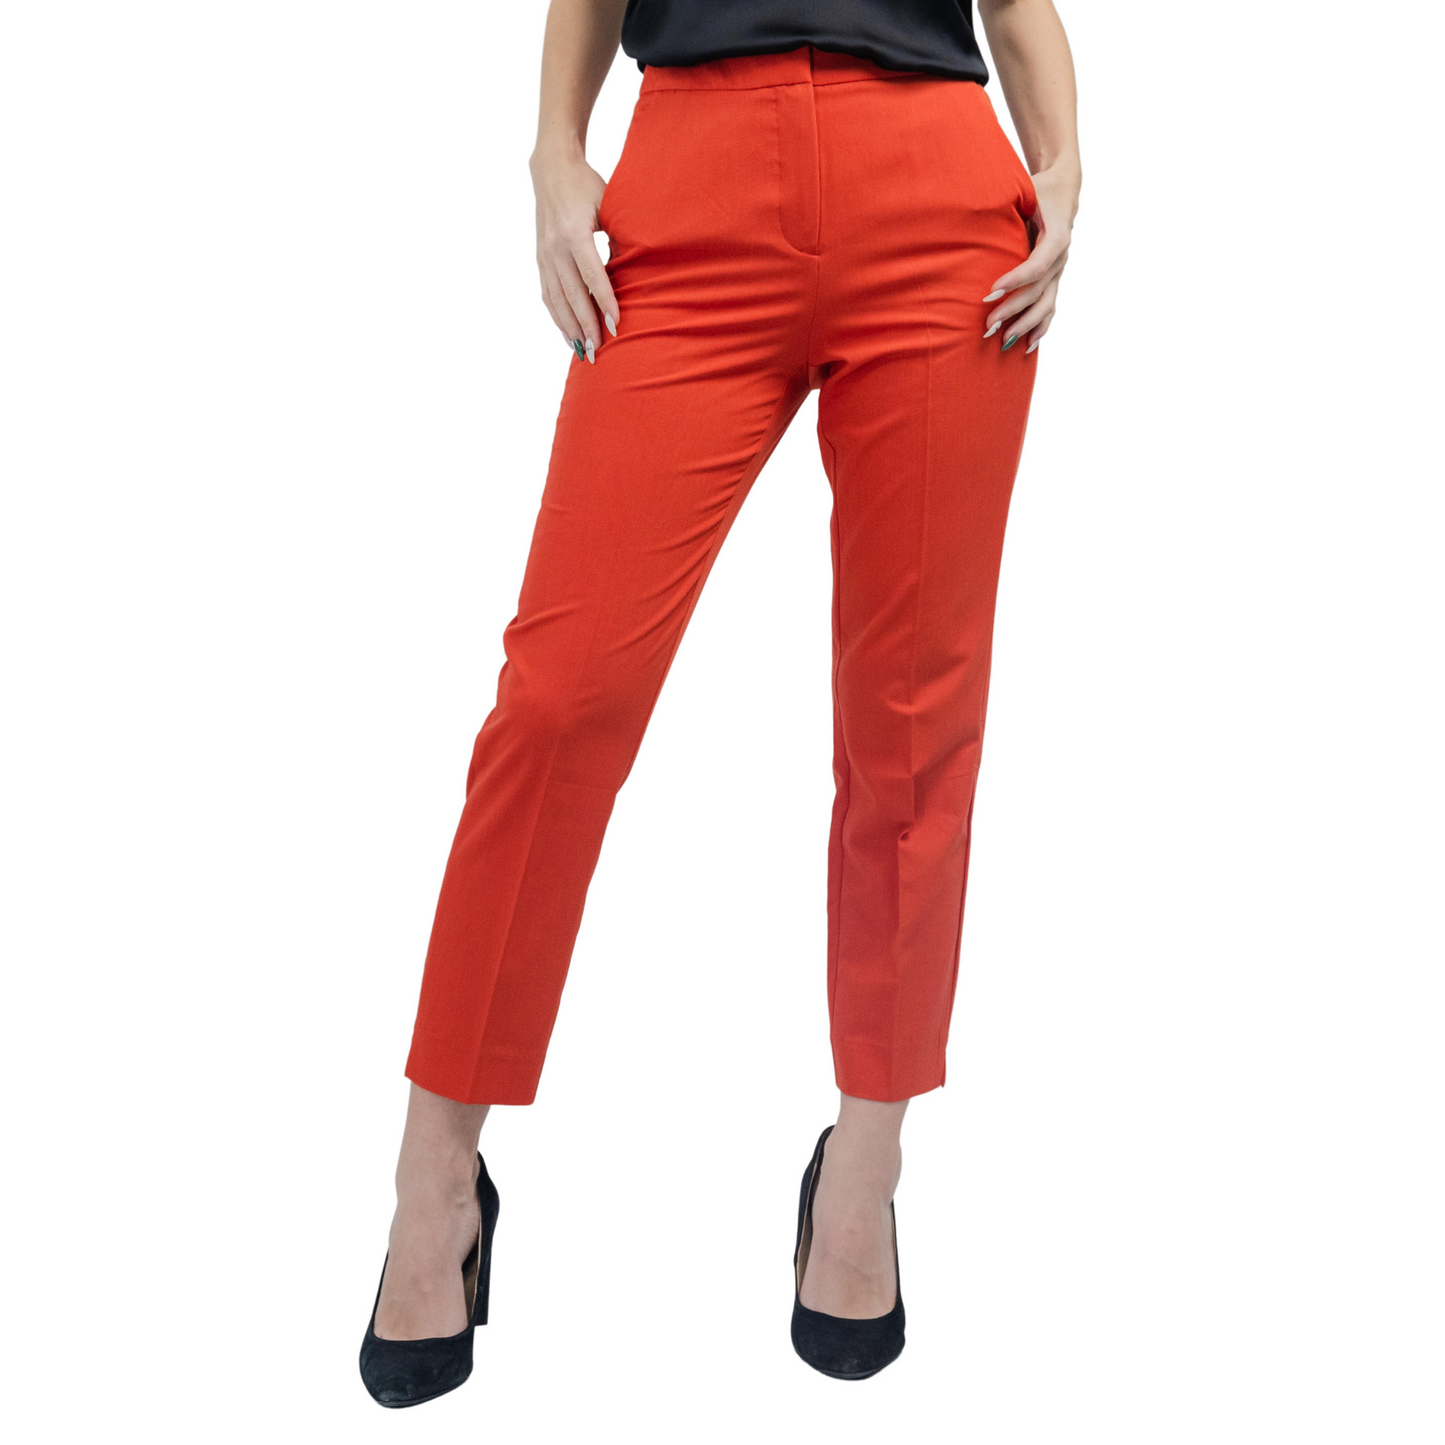 Women's Casual High Waisted Slim Fit Work Pants